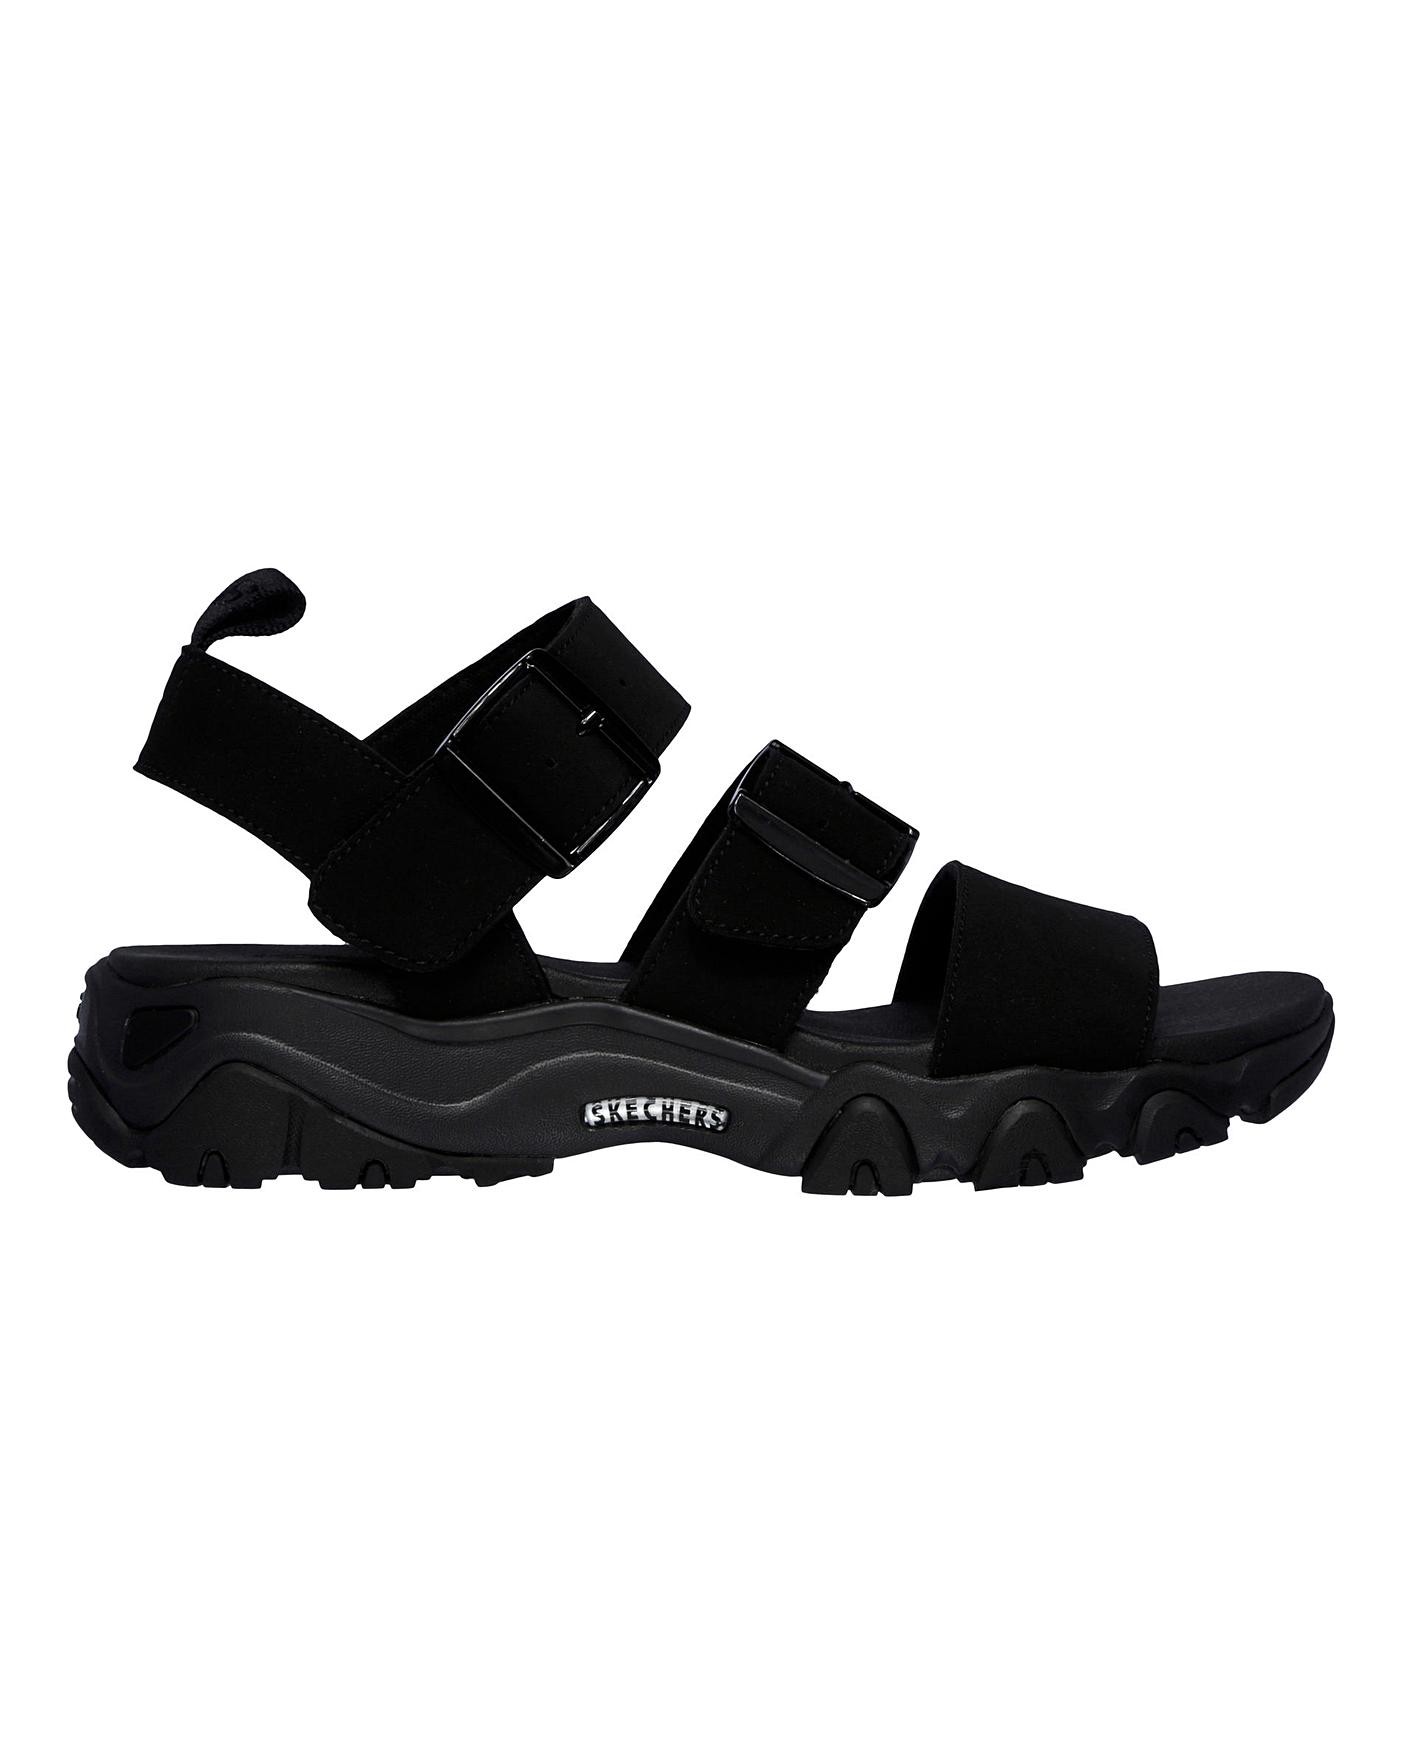 skechers extra wide sandals Sale,up to 